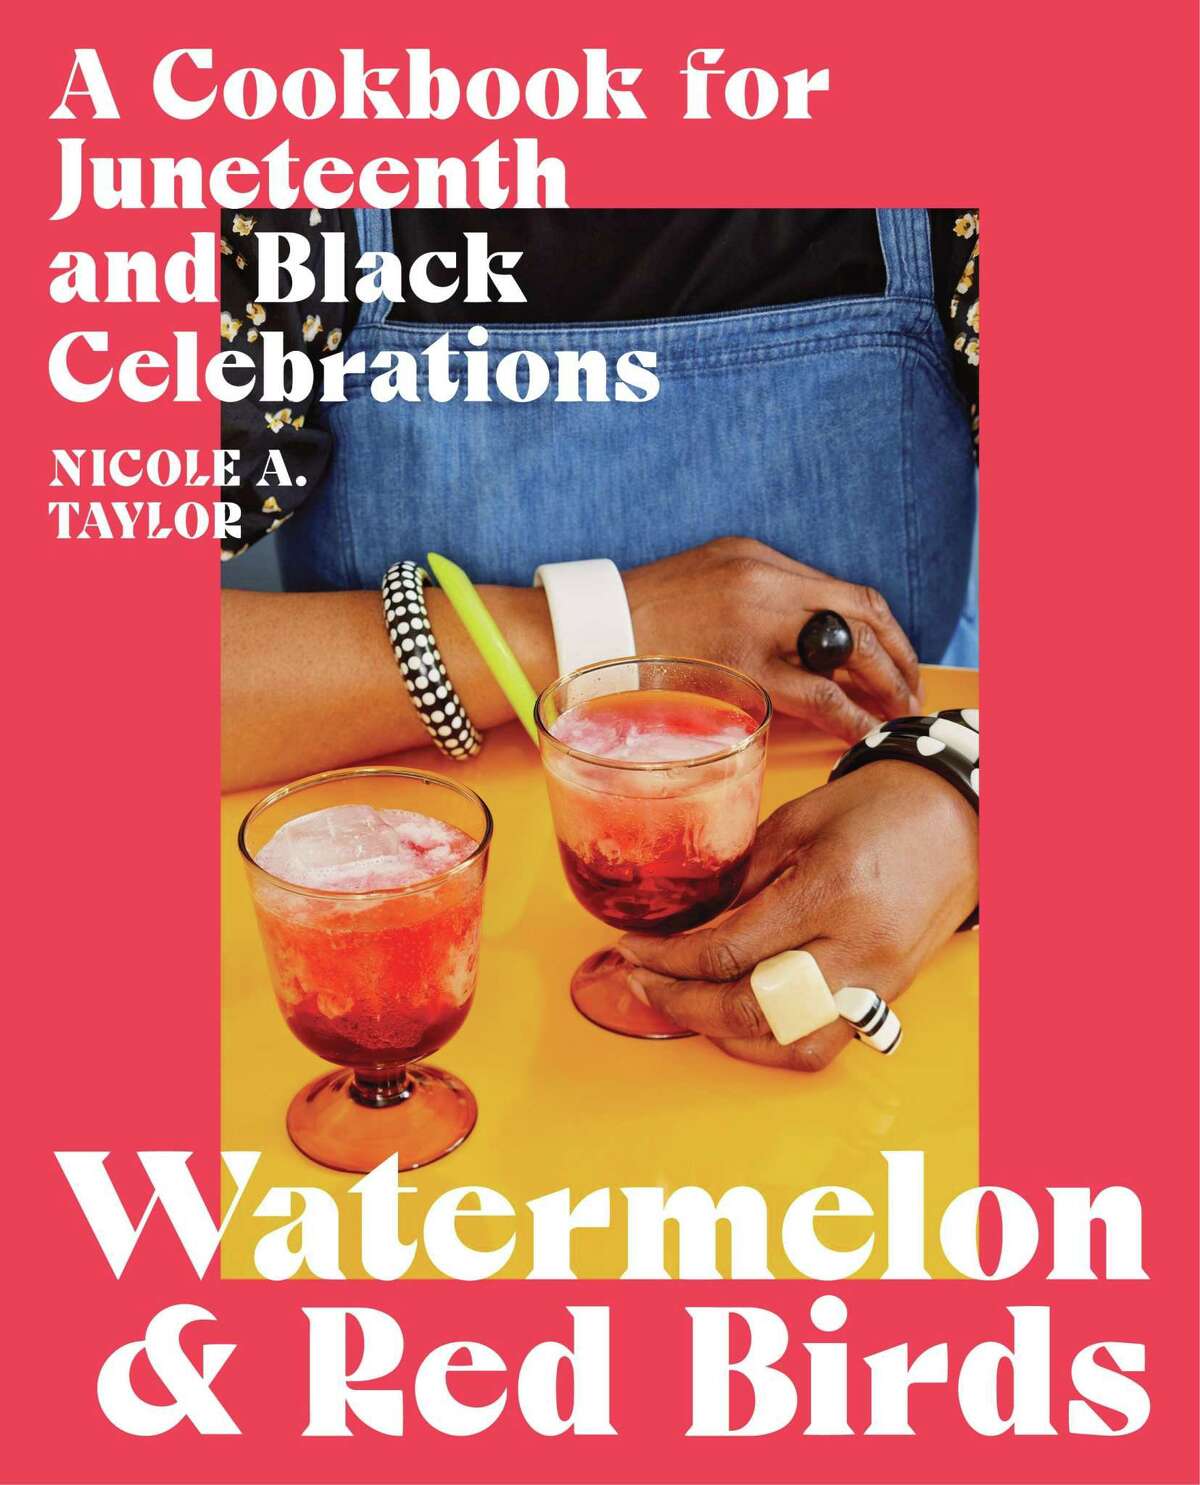 Cover of a the Juneteenth cookbook “Watermelon & Red Birds” by Nicole A. Taylor.